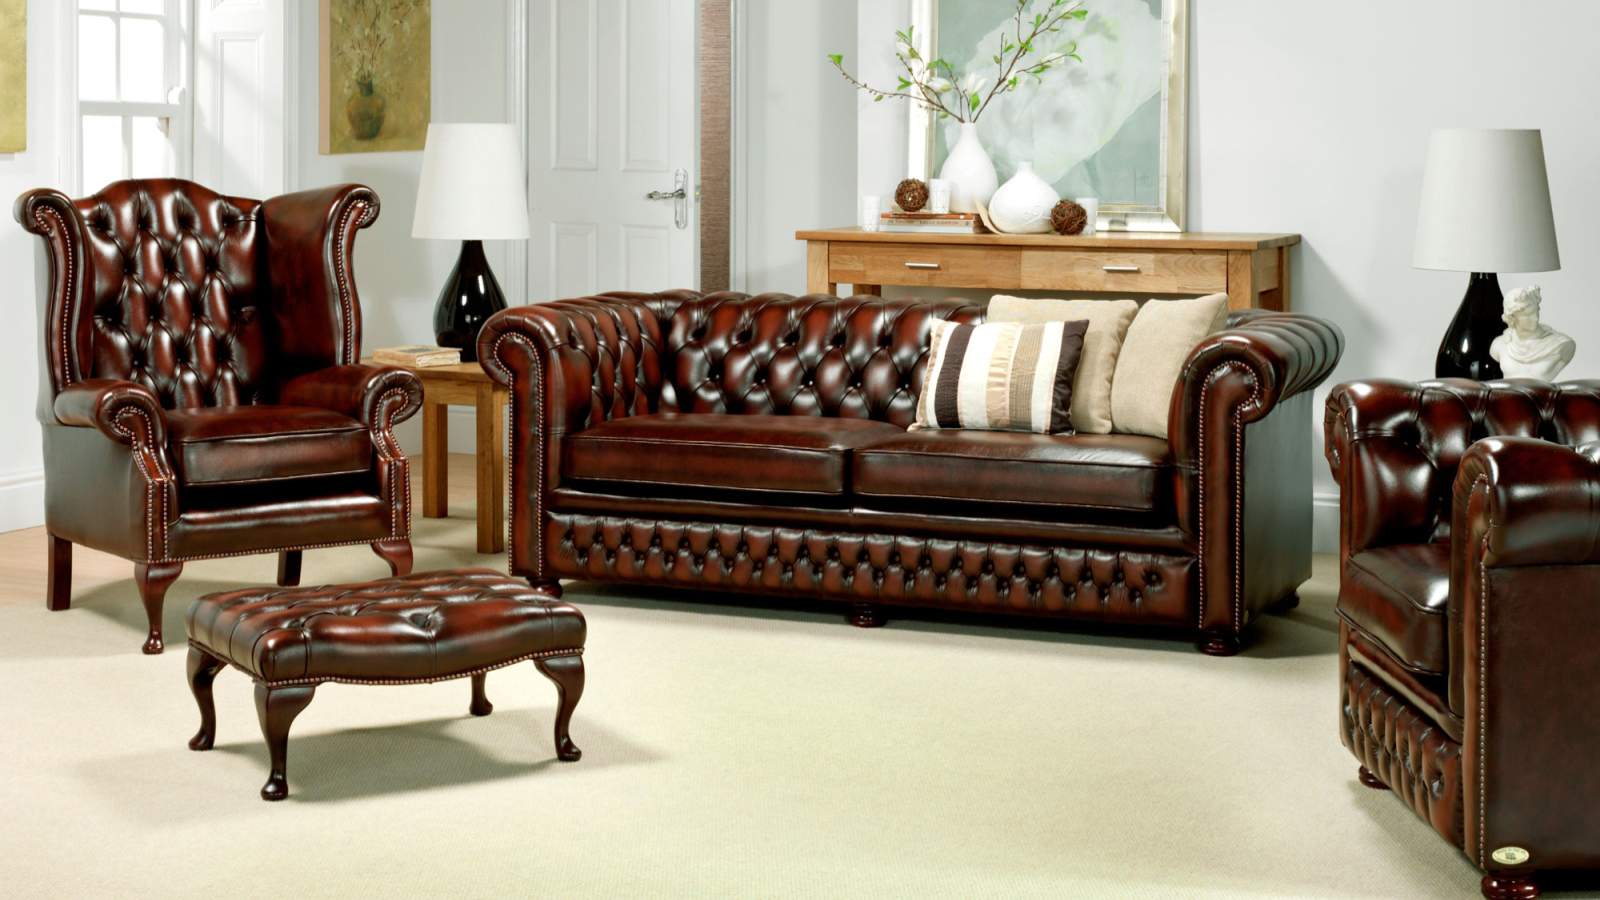 How to Make Your Furniture Last Longer